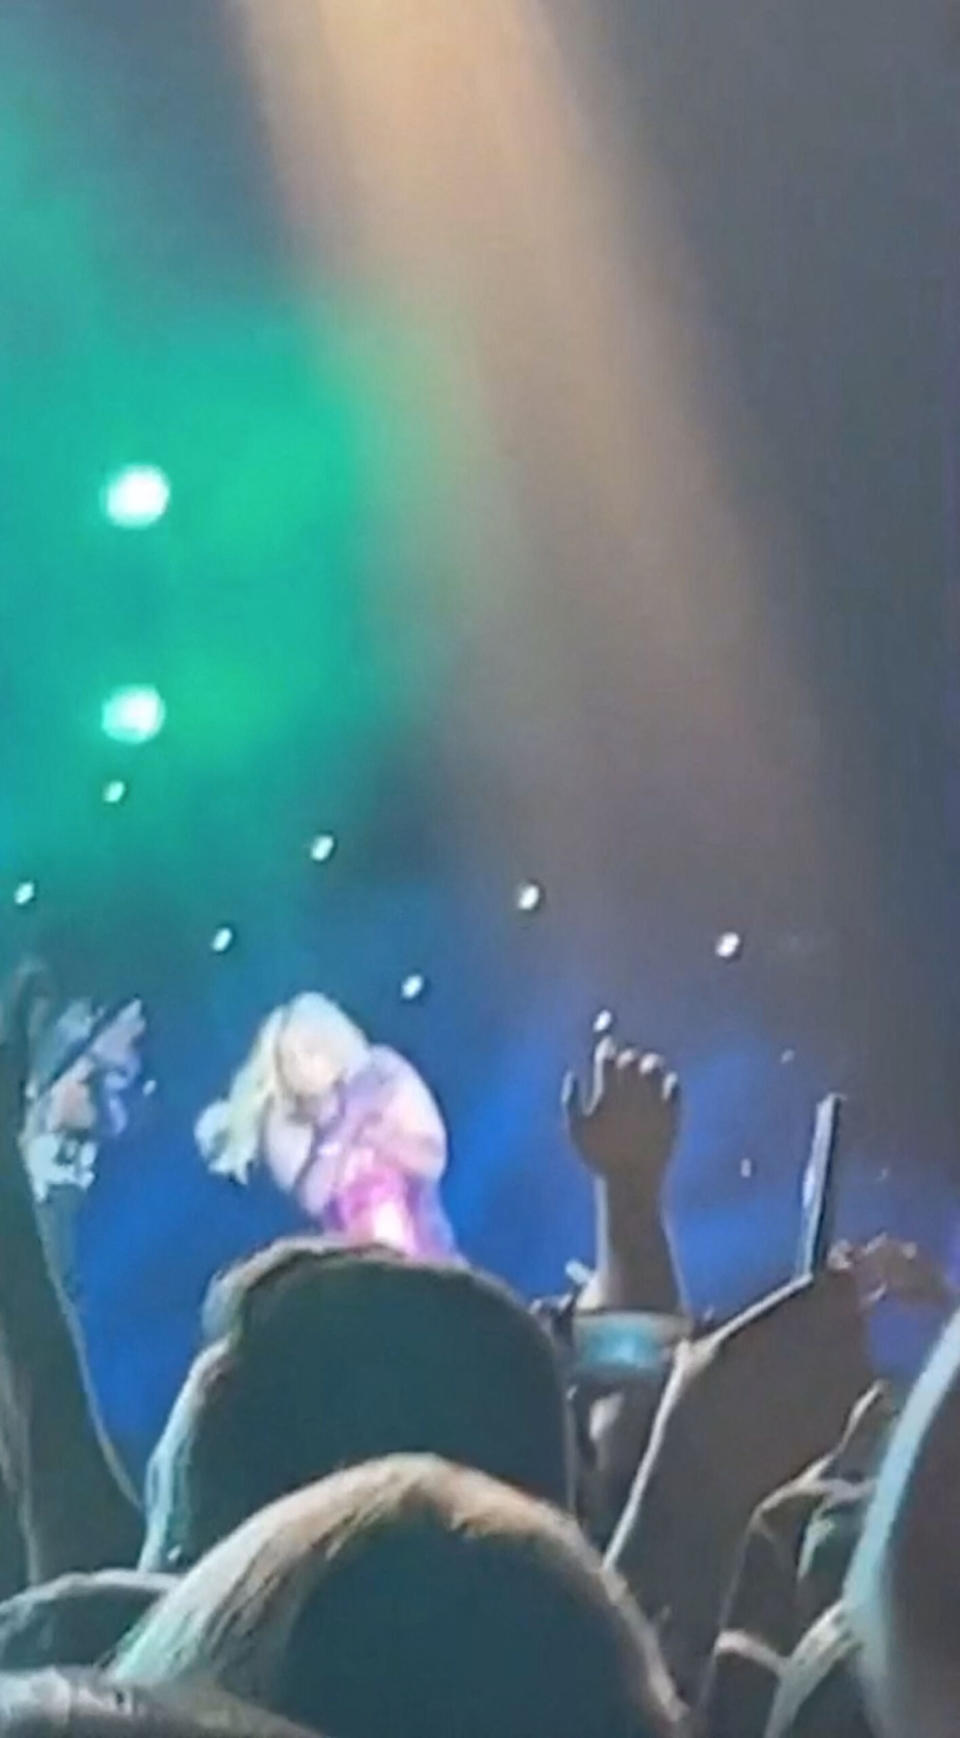 Bebe Rexha hit in the face by phone thrown from audience during show